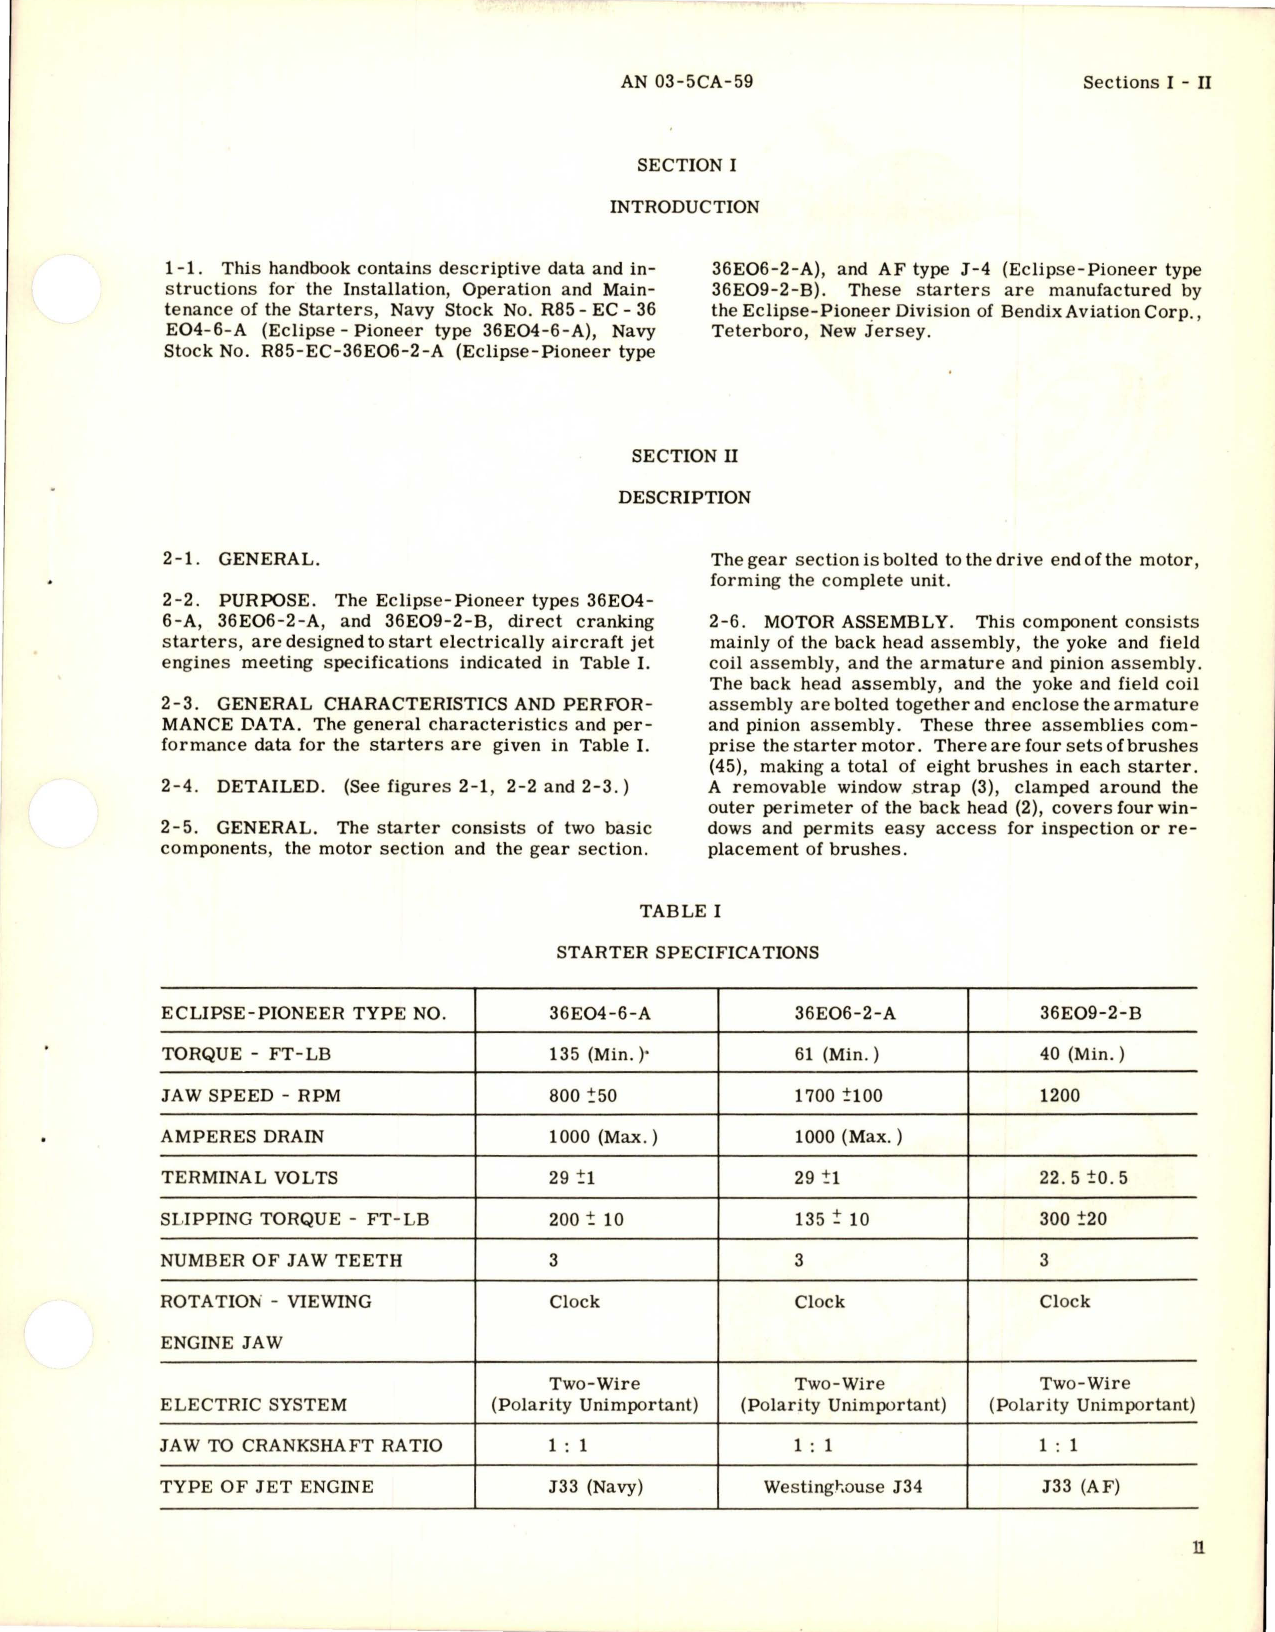 Sample page 5 from AirCorps Library document: Operation and Service Instructions for Starters - Models 36E04-6-A, 36E06-2-A, and 36E09-2-B